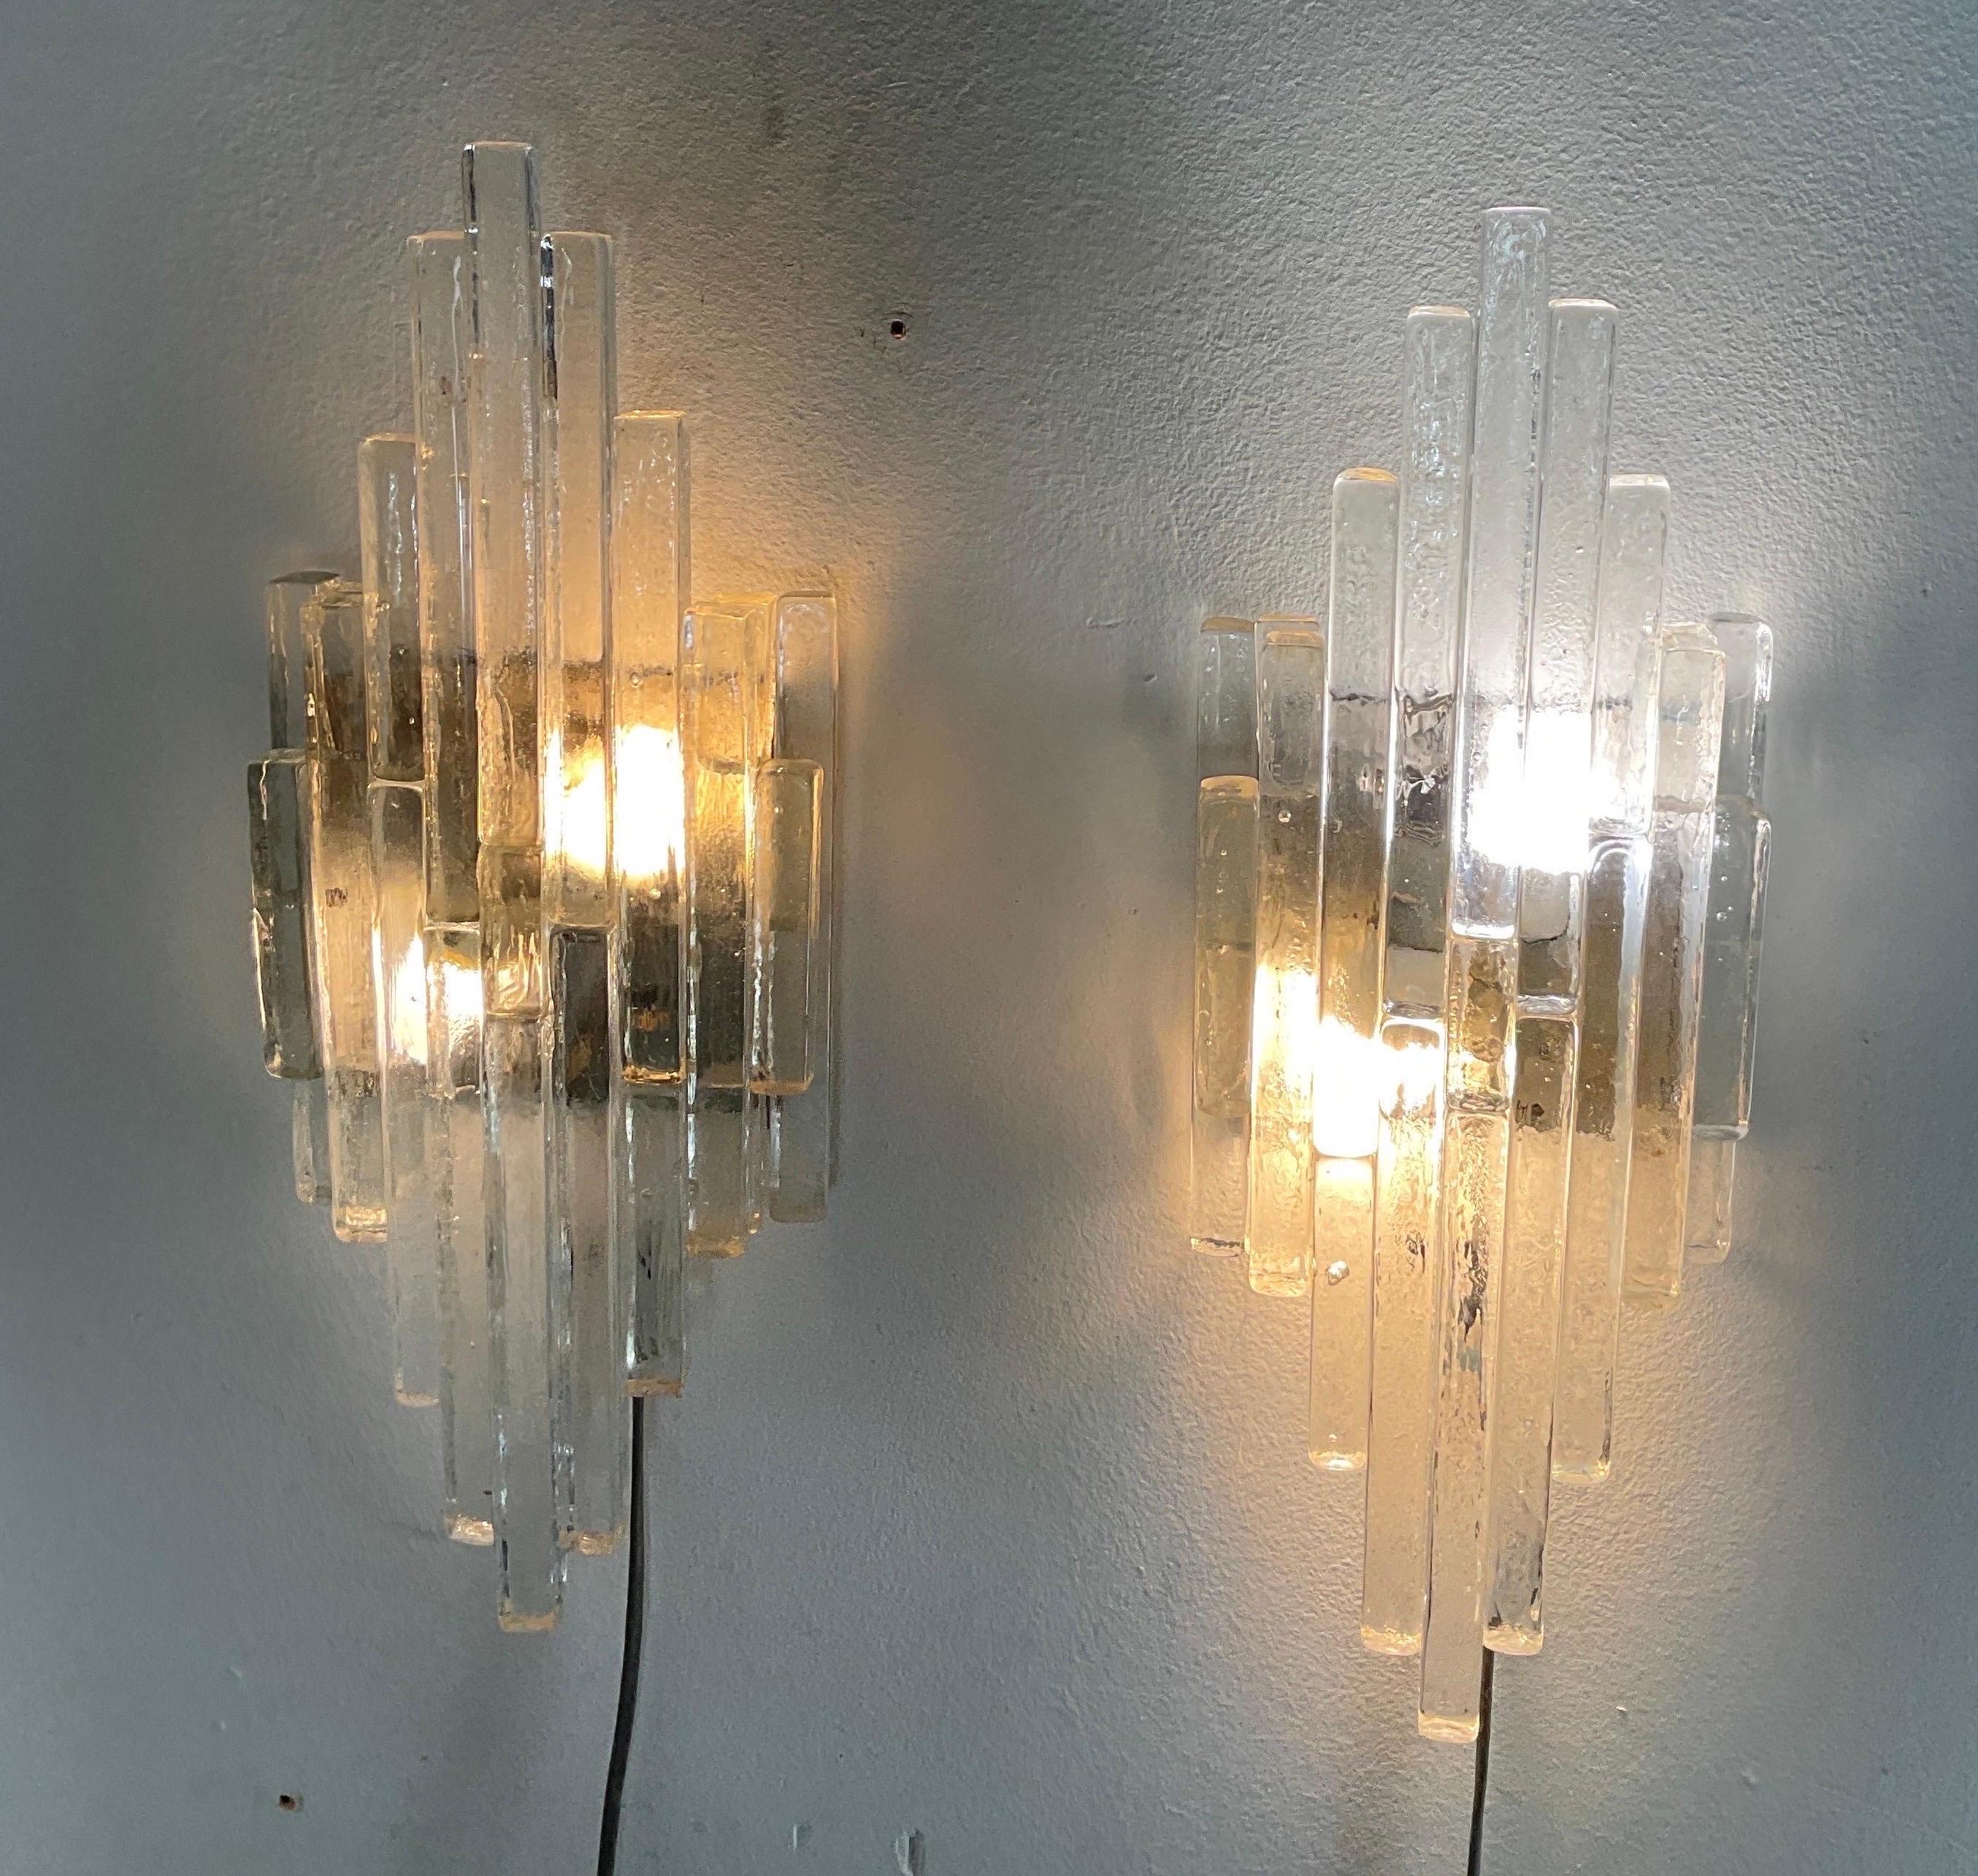 Steel 'Linea' series wall lamps, Poliarte Production, Verona, '70s. For Sale